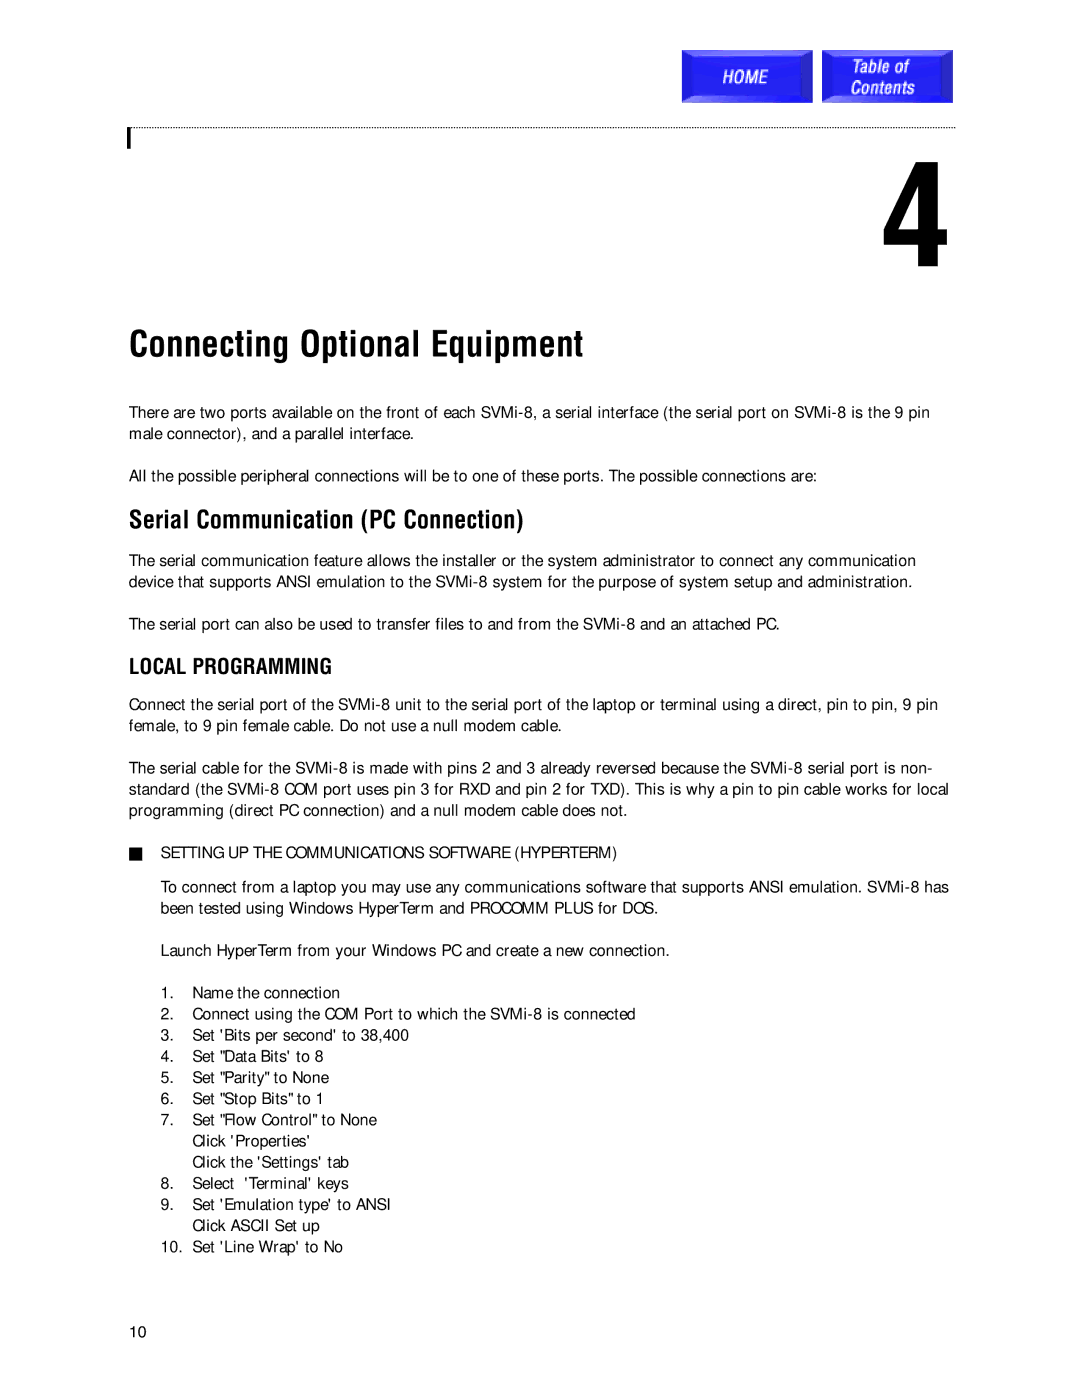 Samsung SVMi-8 technical manual Connecting Optional Equipment, Serial Communication PC Connection, Local Programming 